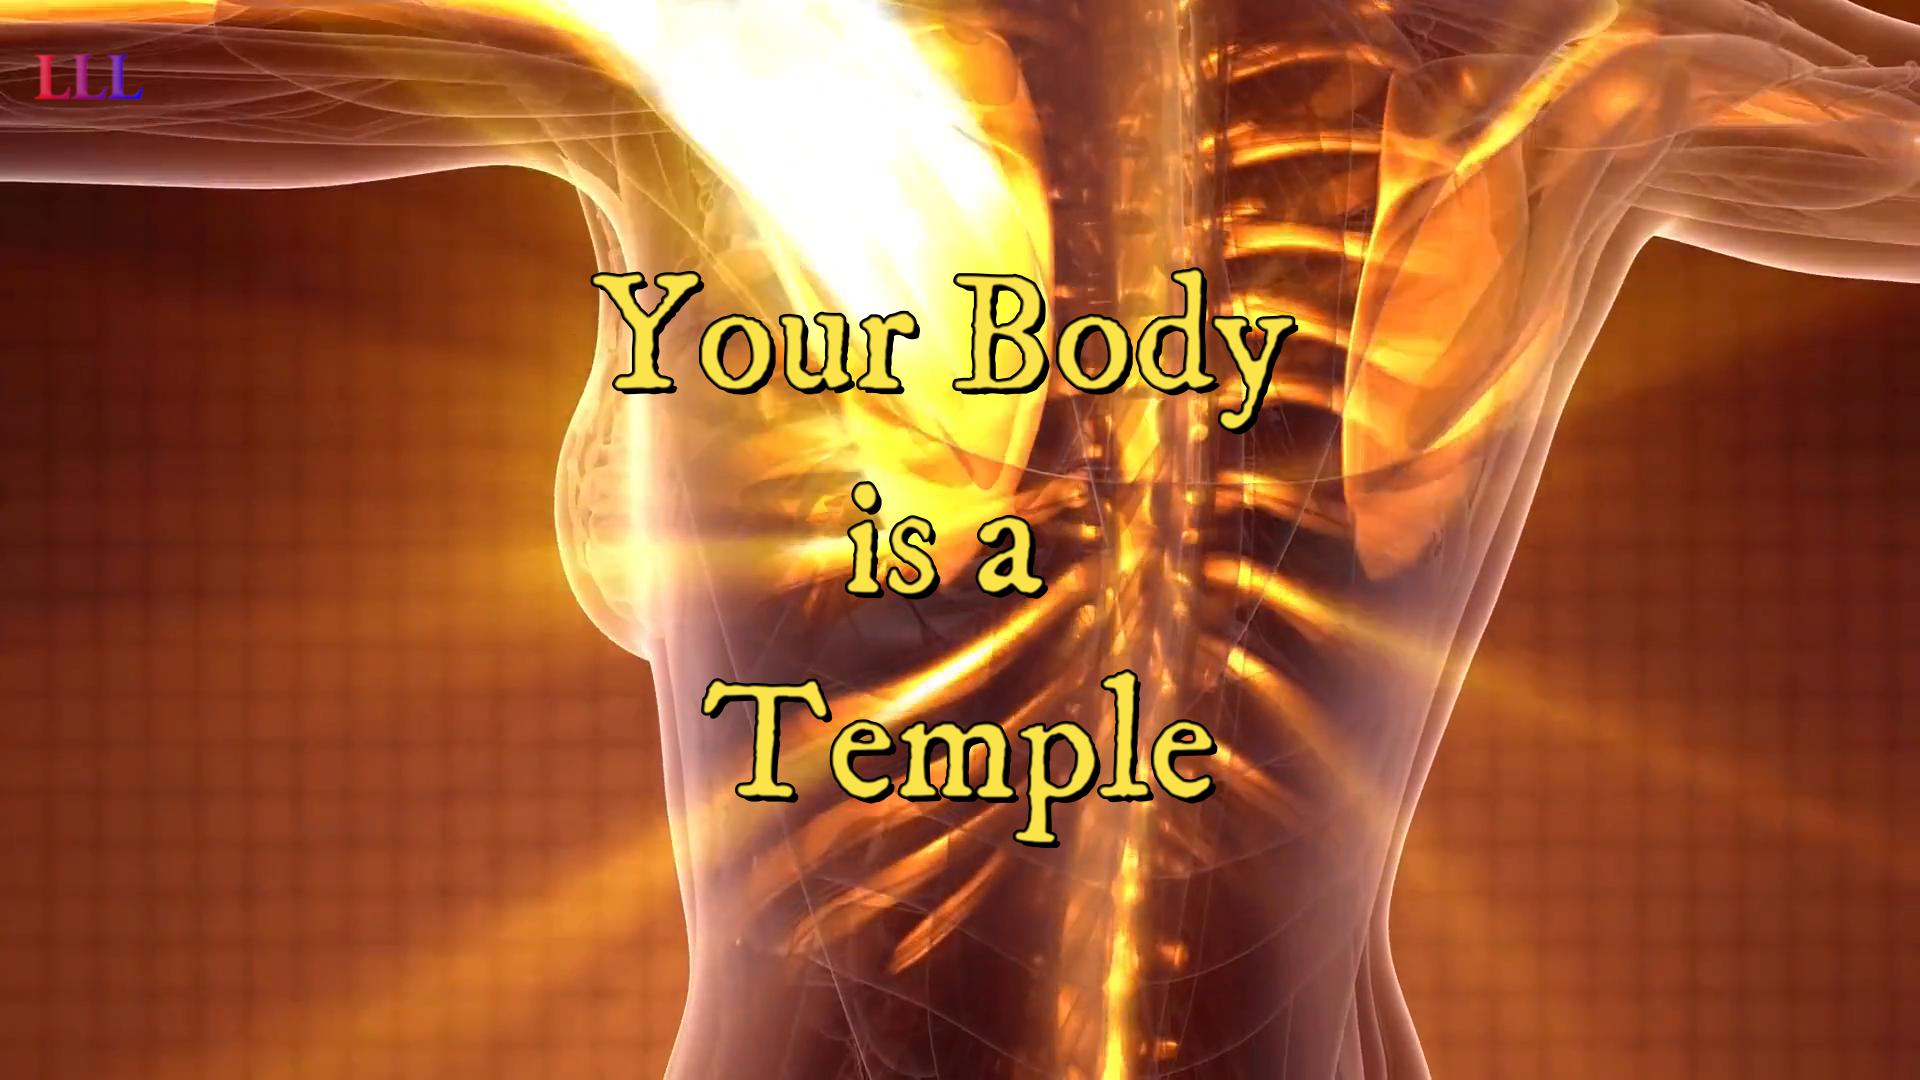 Your Body is a Temple